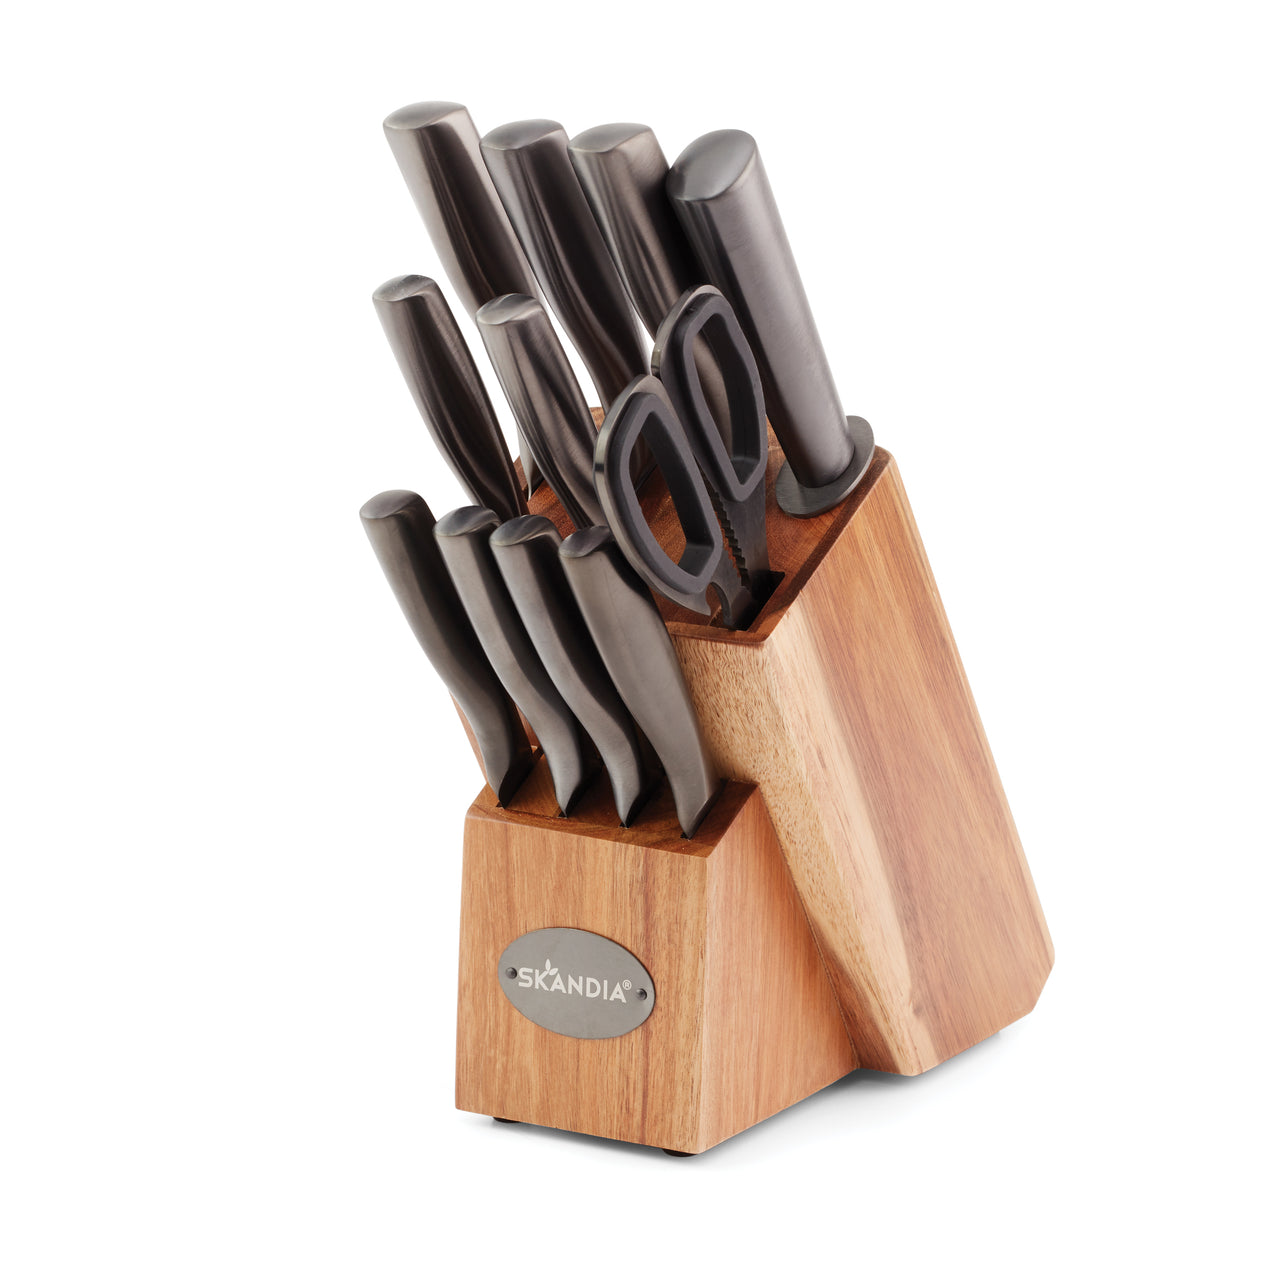 Skandia 5 piece knife set - household items - by owner